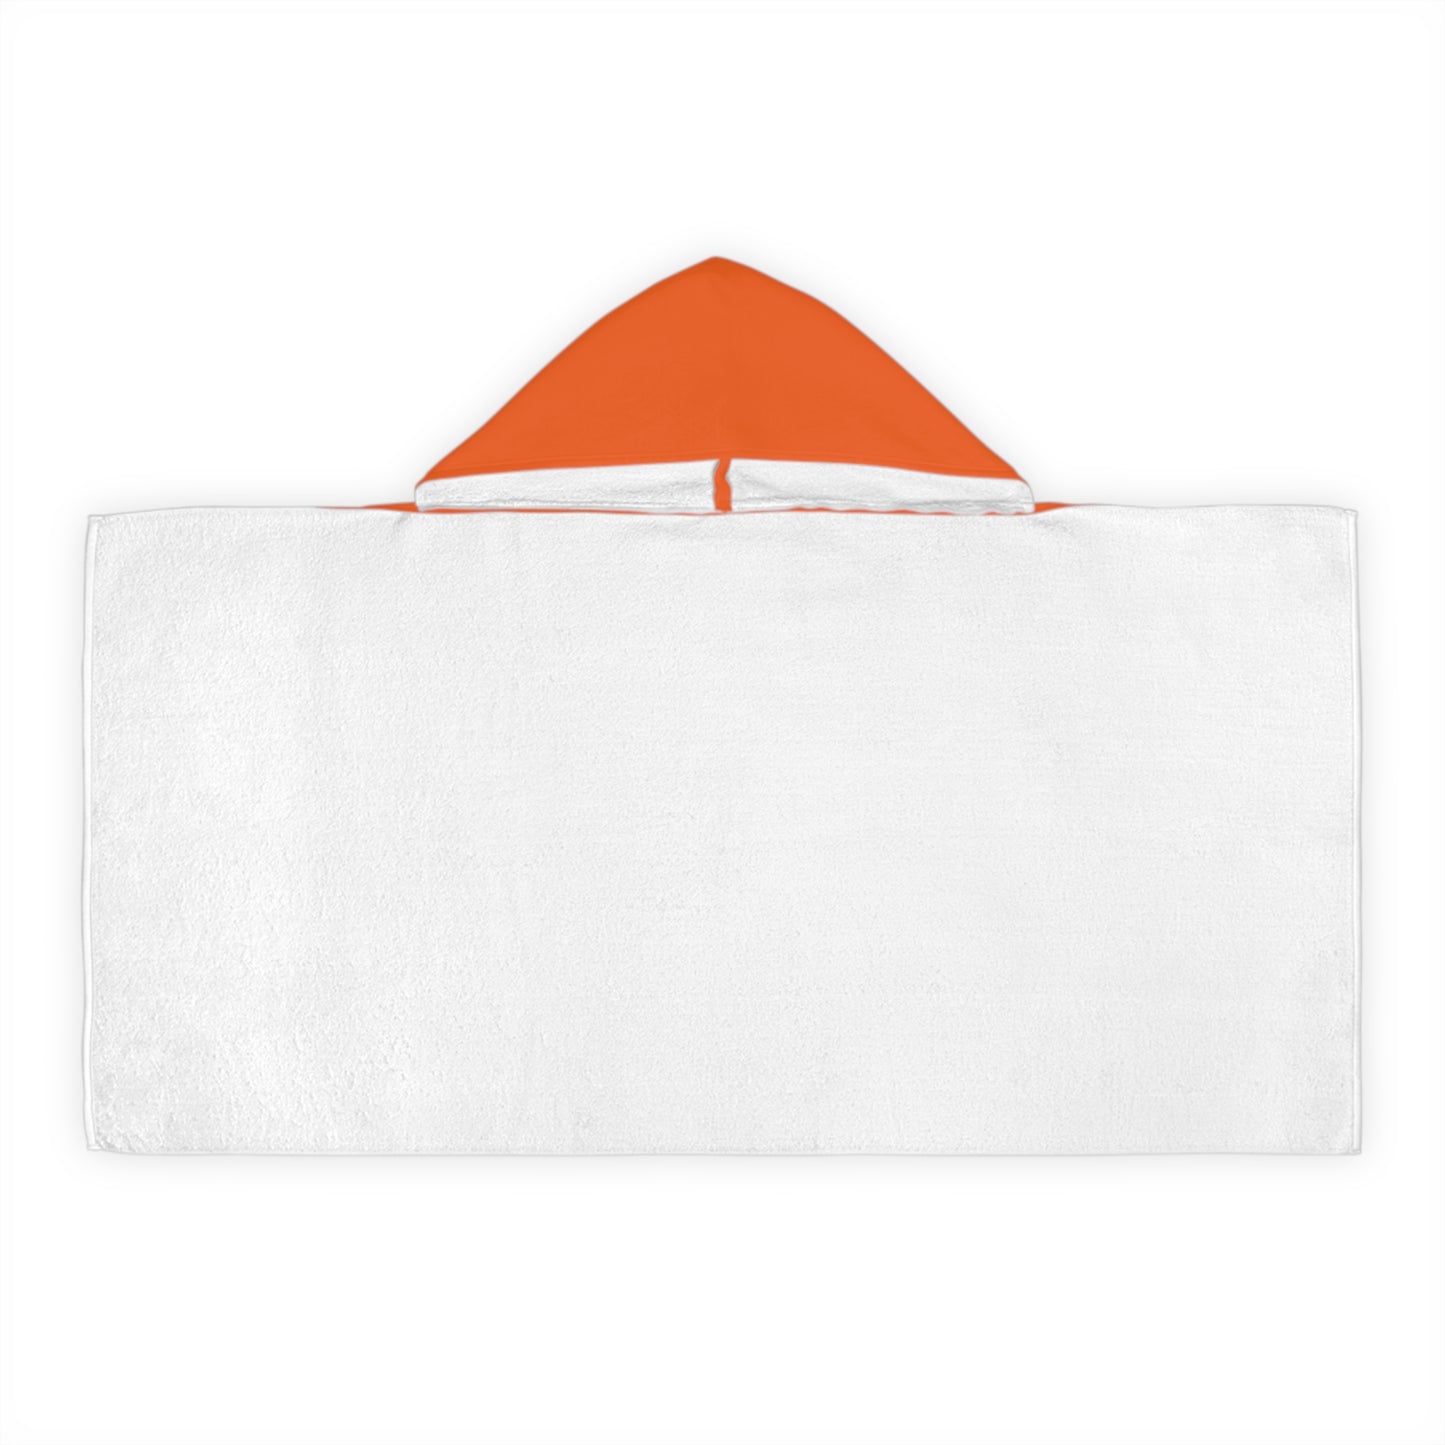 Youth Hooded Towel- "Have a Turtally Awesome Day"  (Orange)